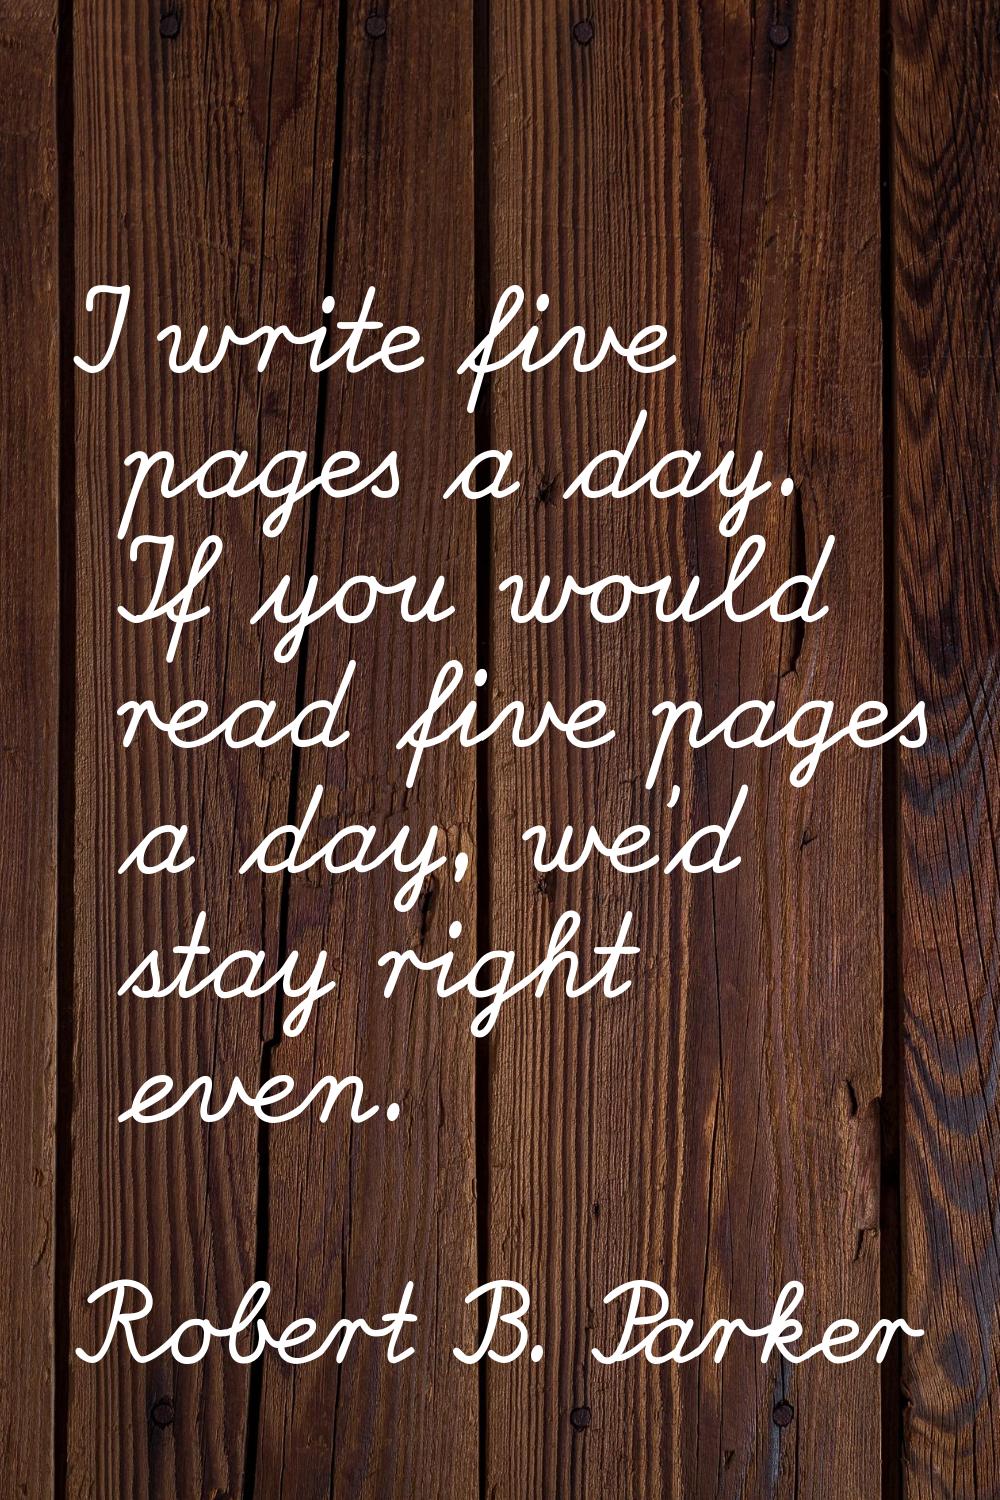 I write five pages a day. If you would read five pages a day, we'd stay right even.